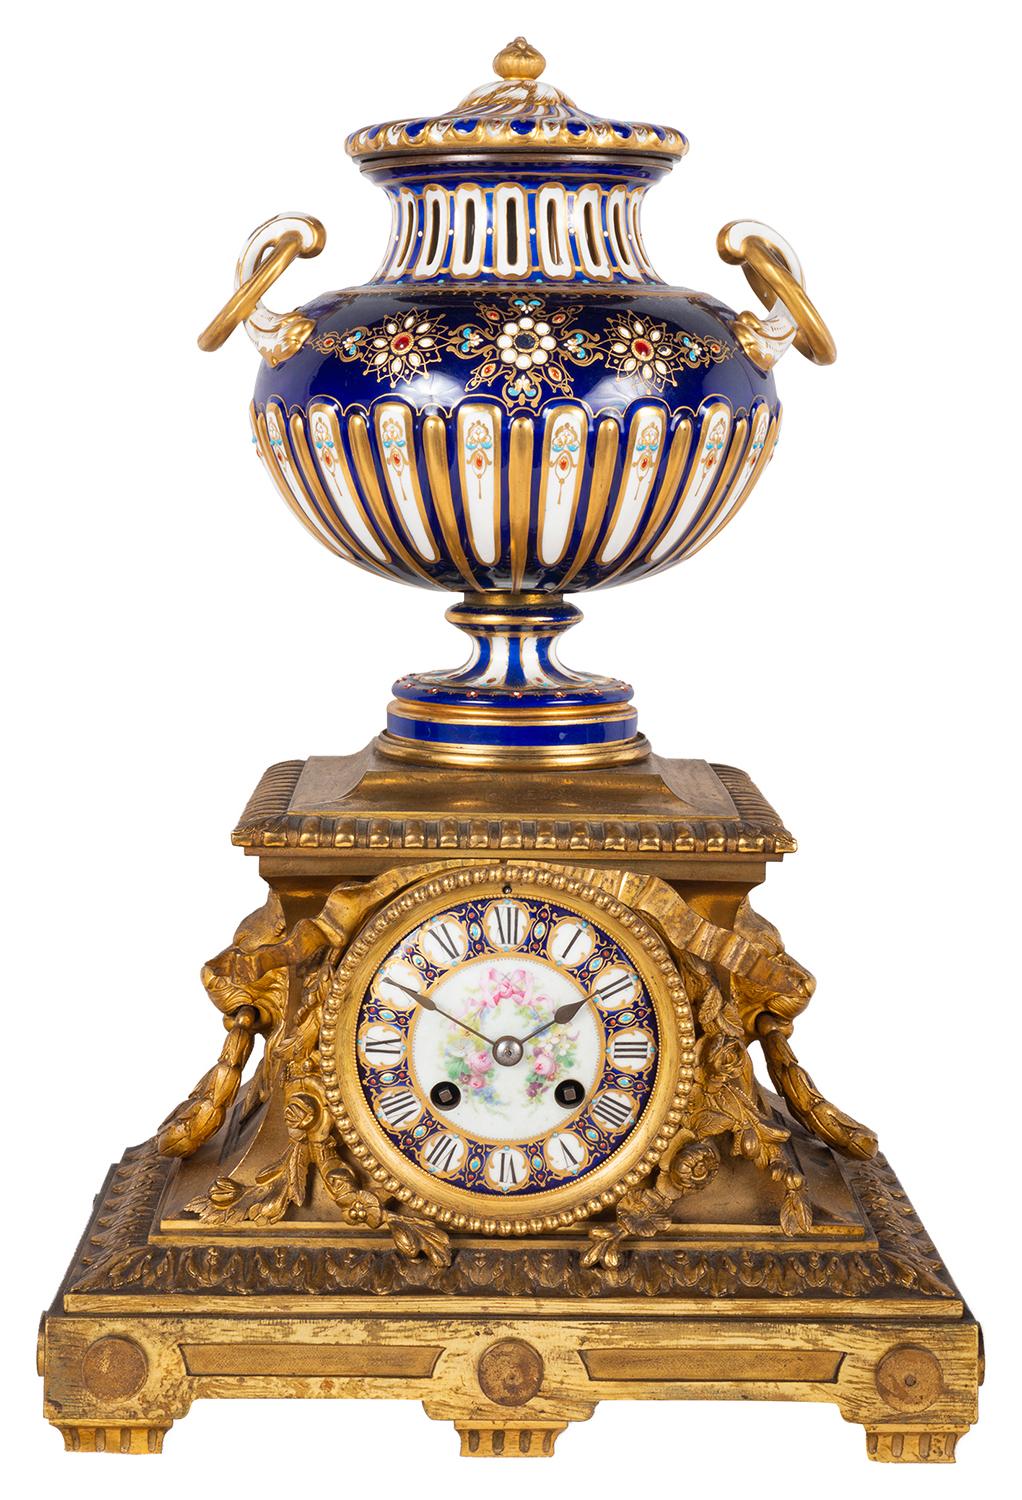 A very good quality late 19th century French gilded ormolu and Sevres style porcelain clock garniture.
The clock having this wonderful cobalt blue ground fluted, lidded vase with ring drop handles and classical motif decoration. Above a porcelain